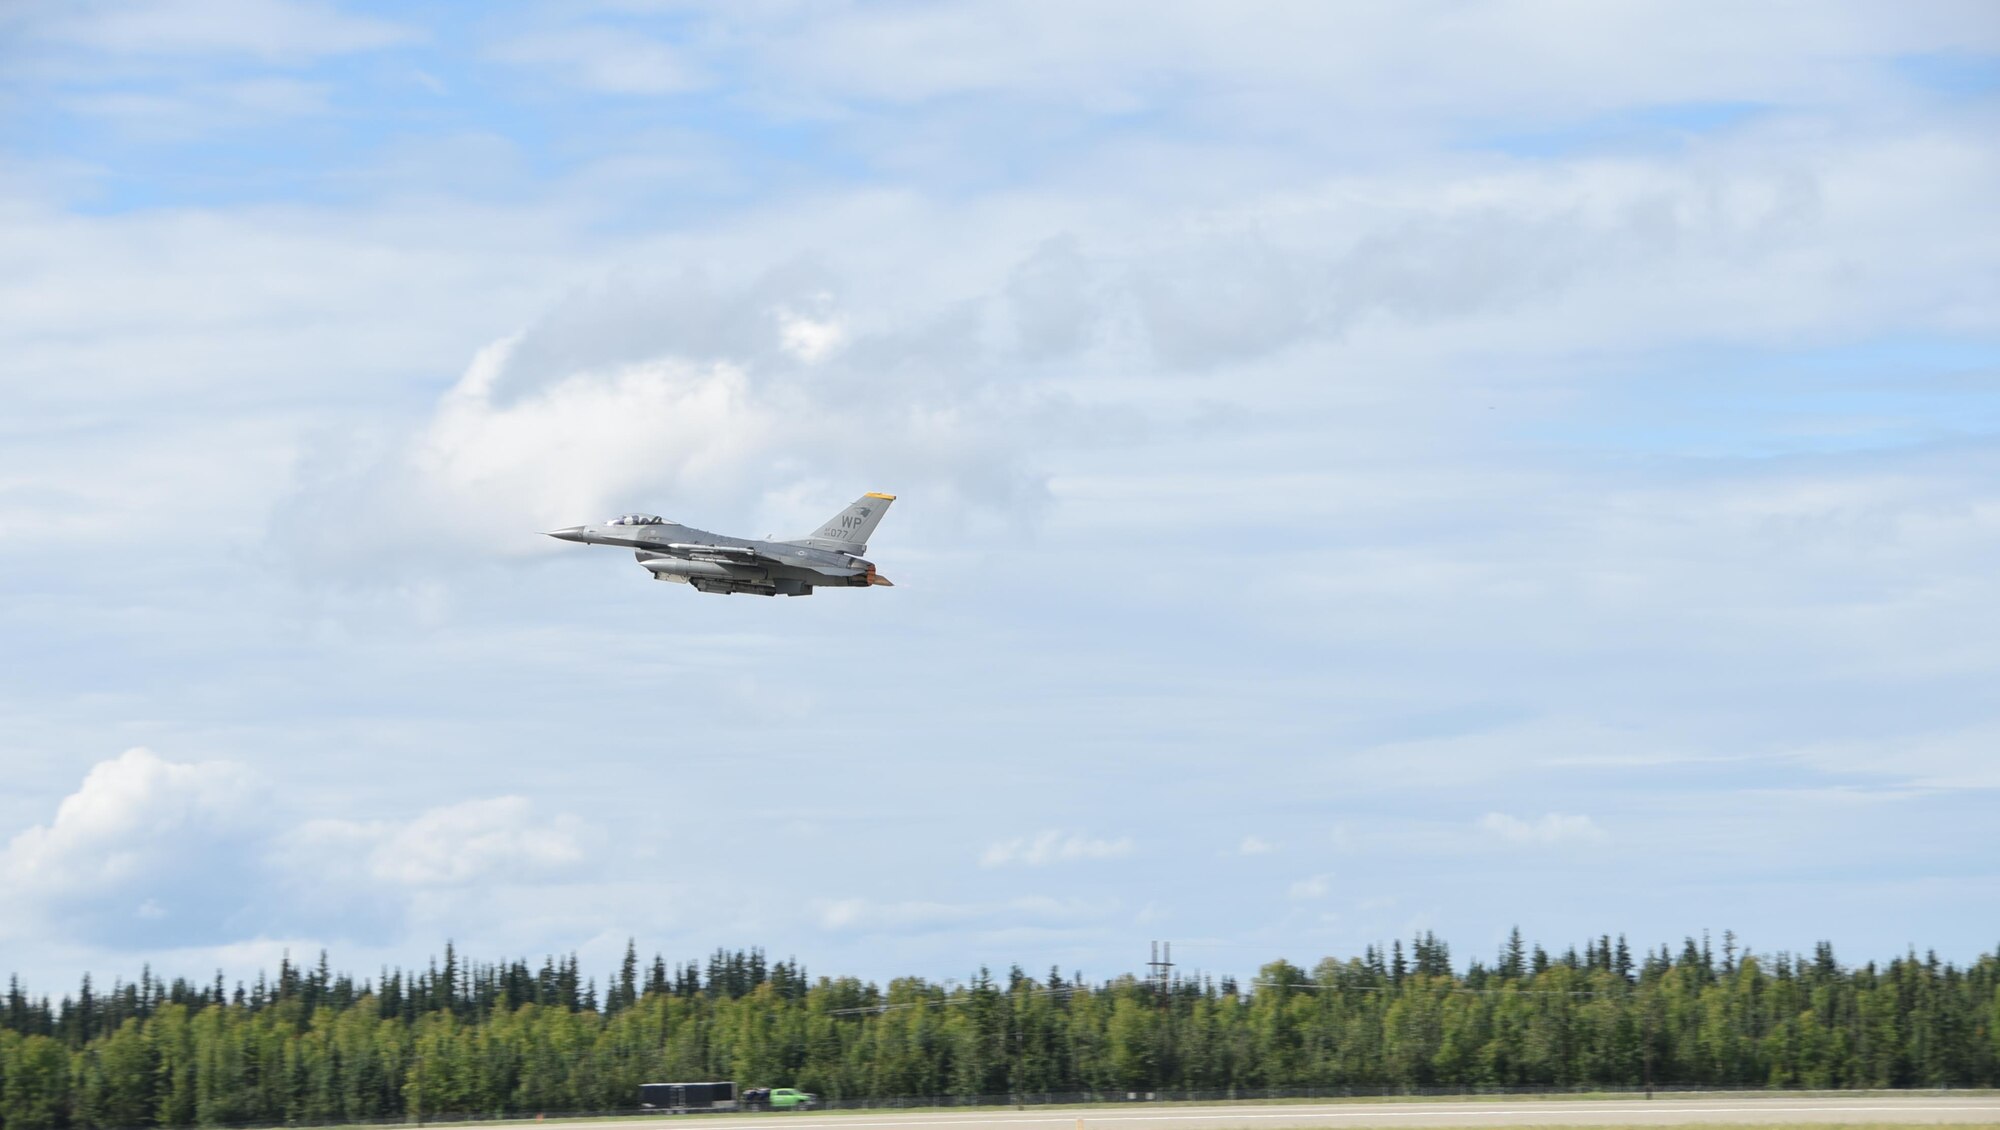 A U.S. Air Force F-16 Fighting Falcon assigned to the 80th Fighter Squadron, Kunsan Air Base, Republic of Korea, takes off from the runway during Red Flag-Alaska at Eielson Air Force Base, Alaska, Aug. 2, 2017. RF-A is a Pacific Air Forces-sponsored, Joint National Training Capability exercise designed to allow pilots to experience real-life scenarios they may encounter. (U.S. Air Force photo by Staff Sgt. Joshua Rosales)